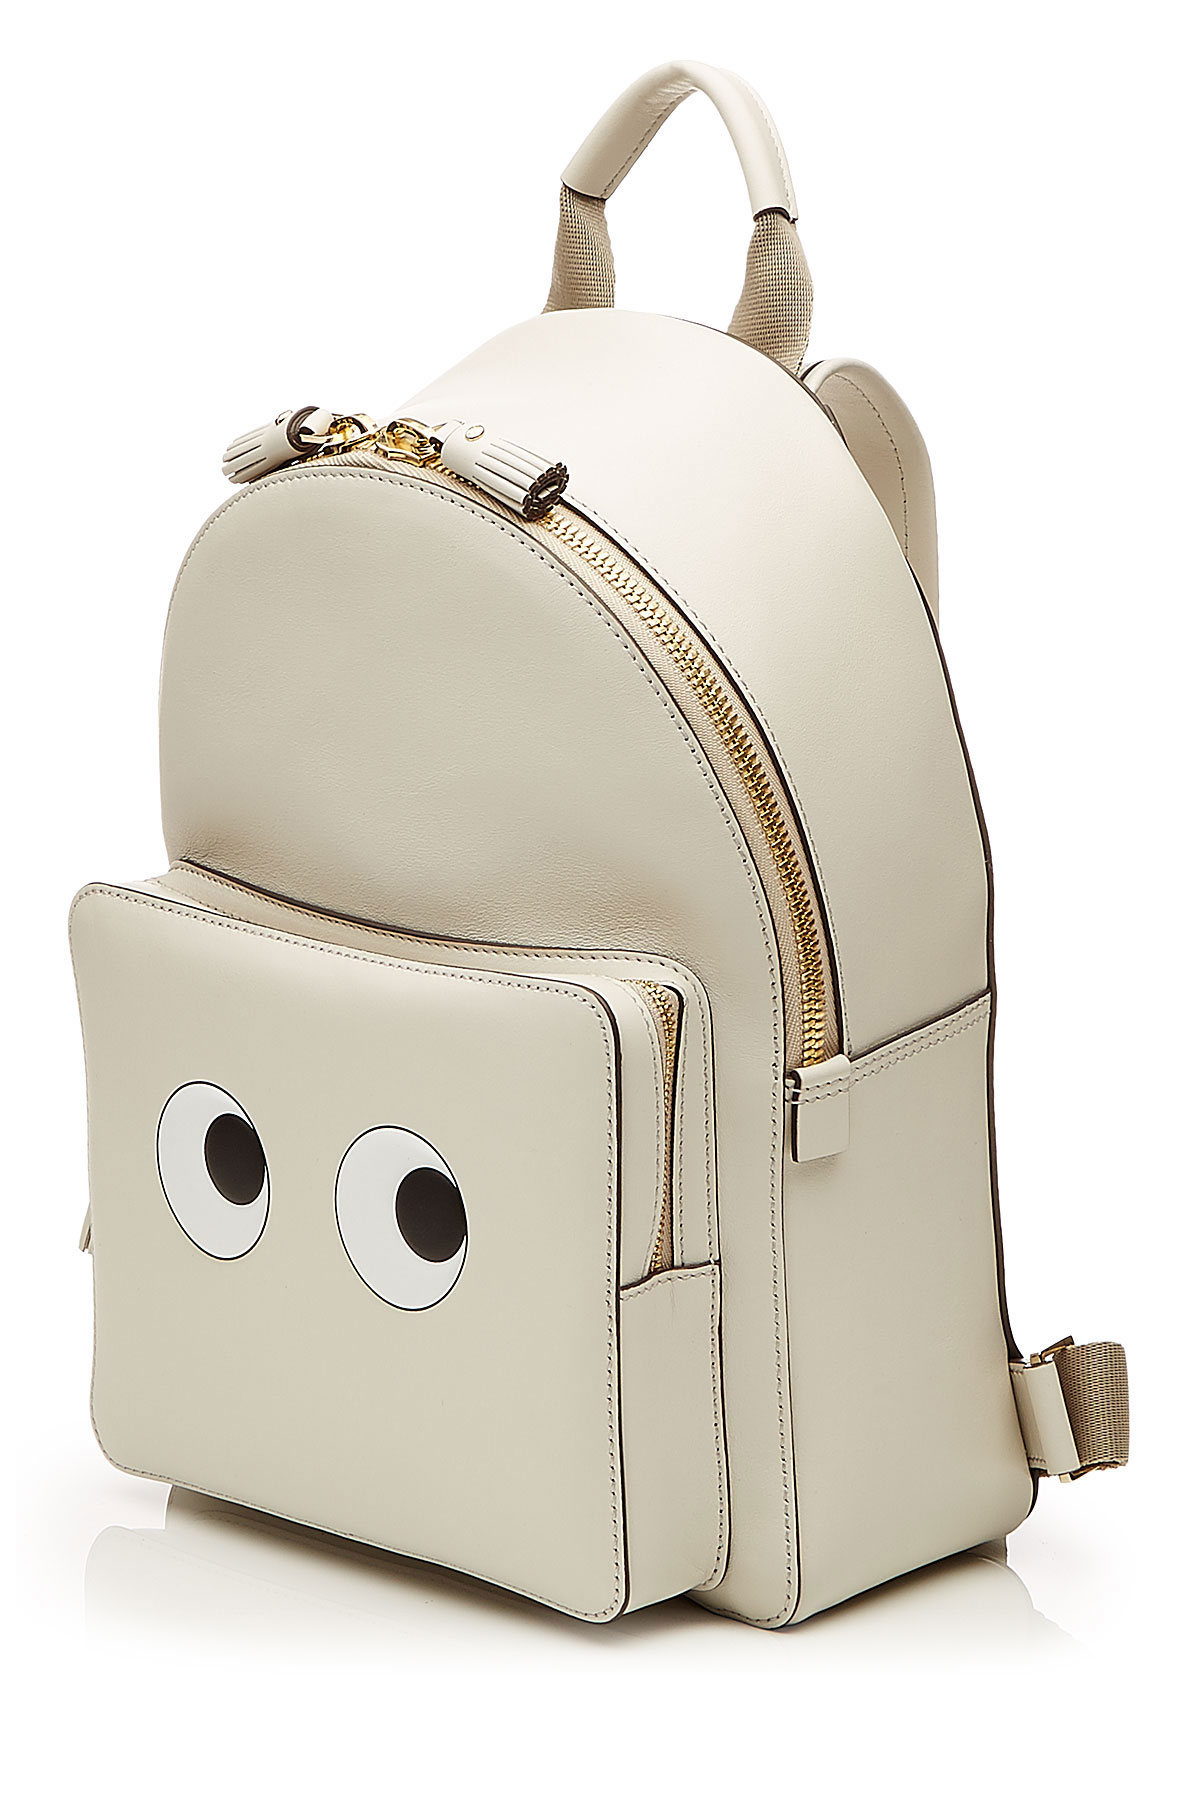 Anya hindmarch Leather Eyes Mini Backpack - White in White | Lyst